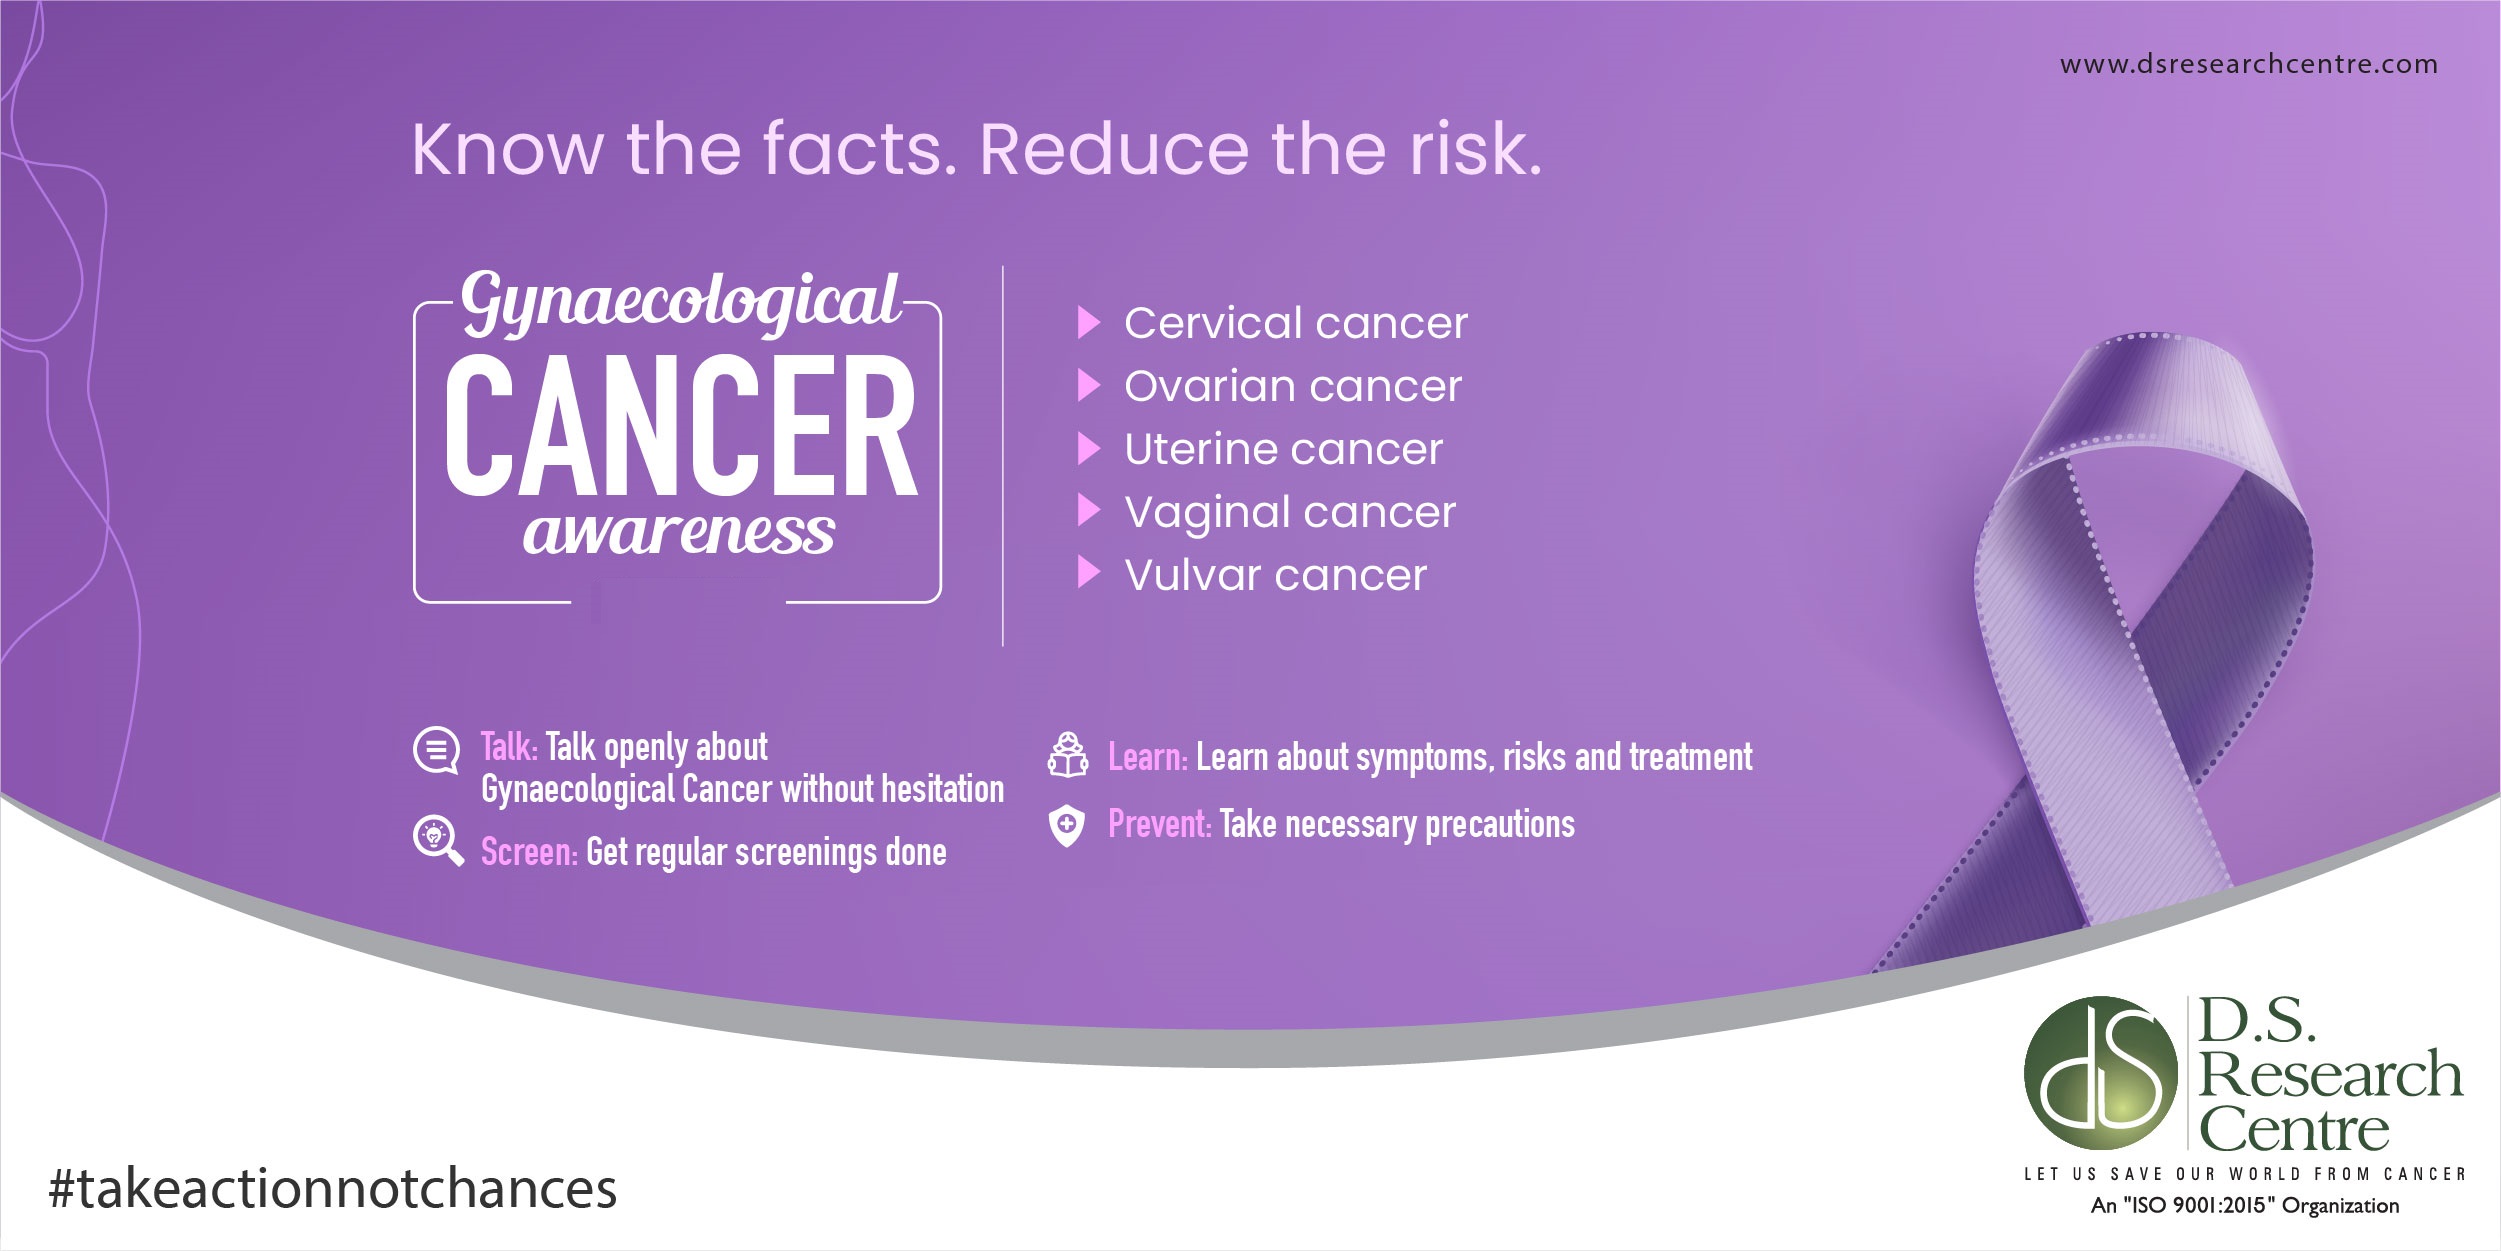 Gynaecological Cancer - Awareness is the Key to Survival